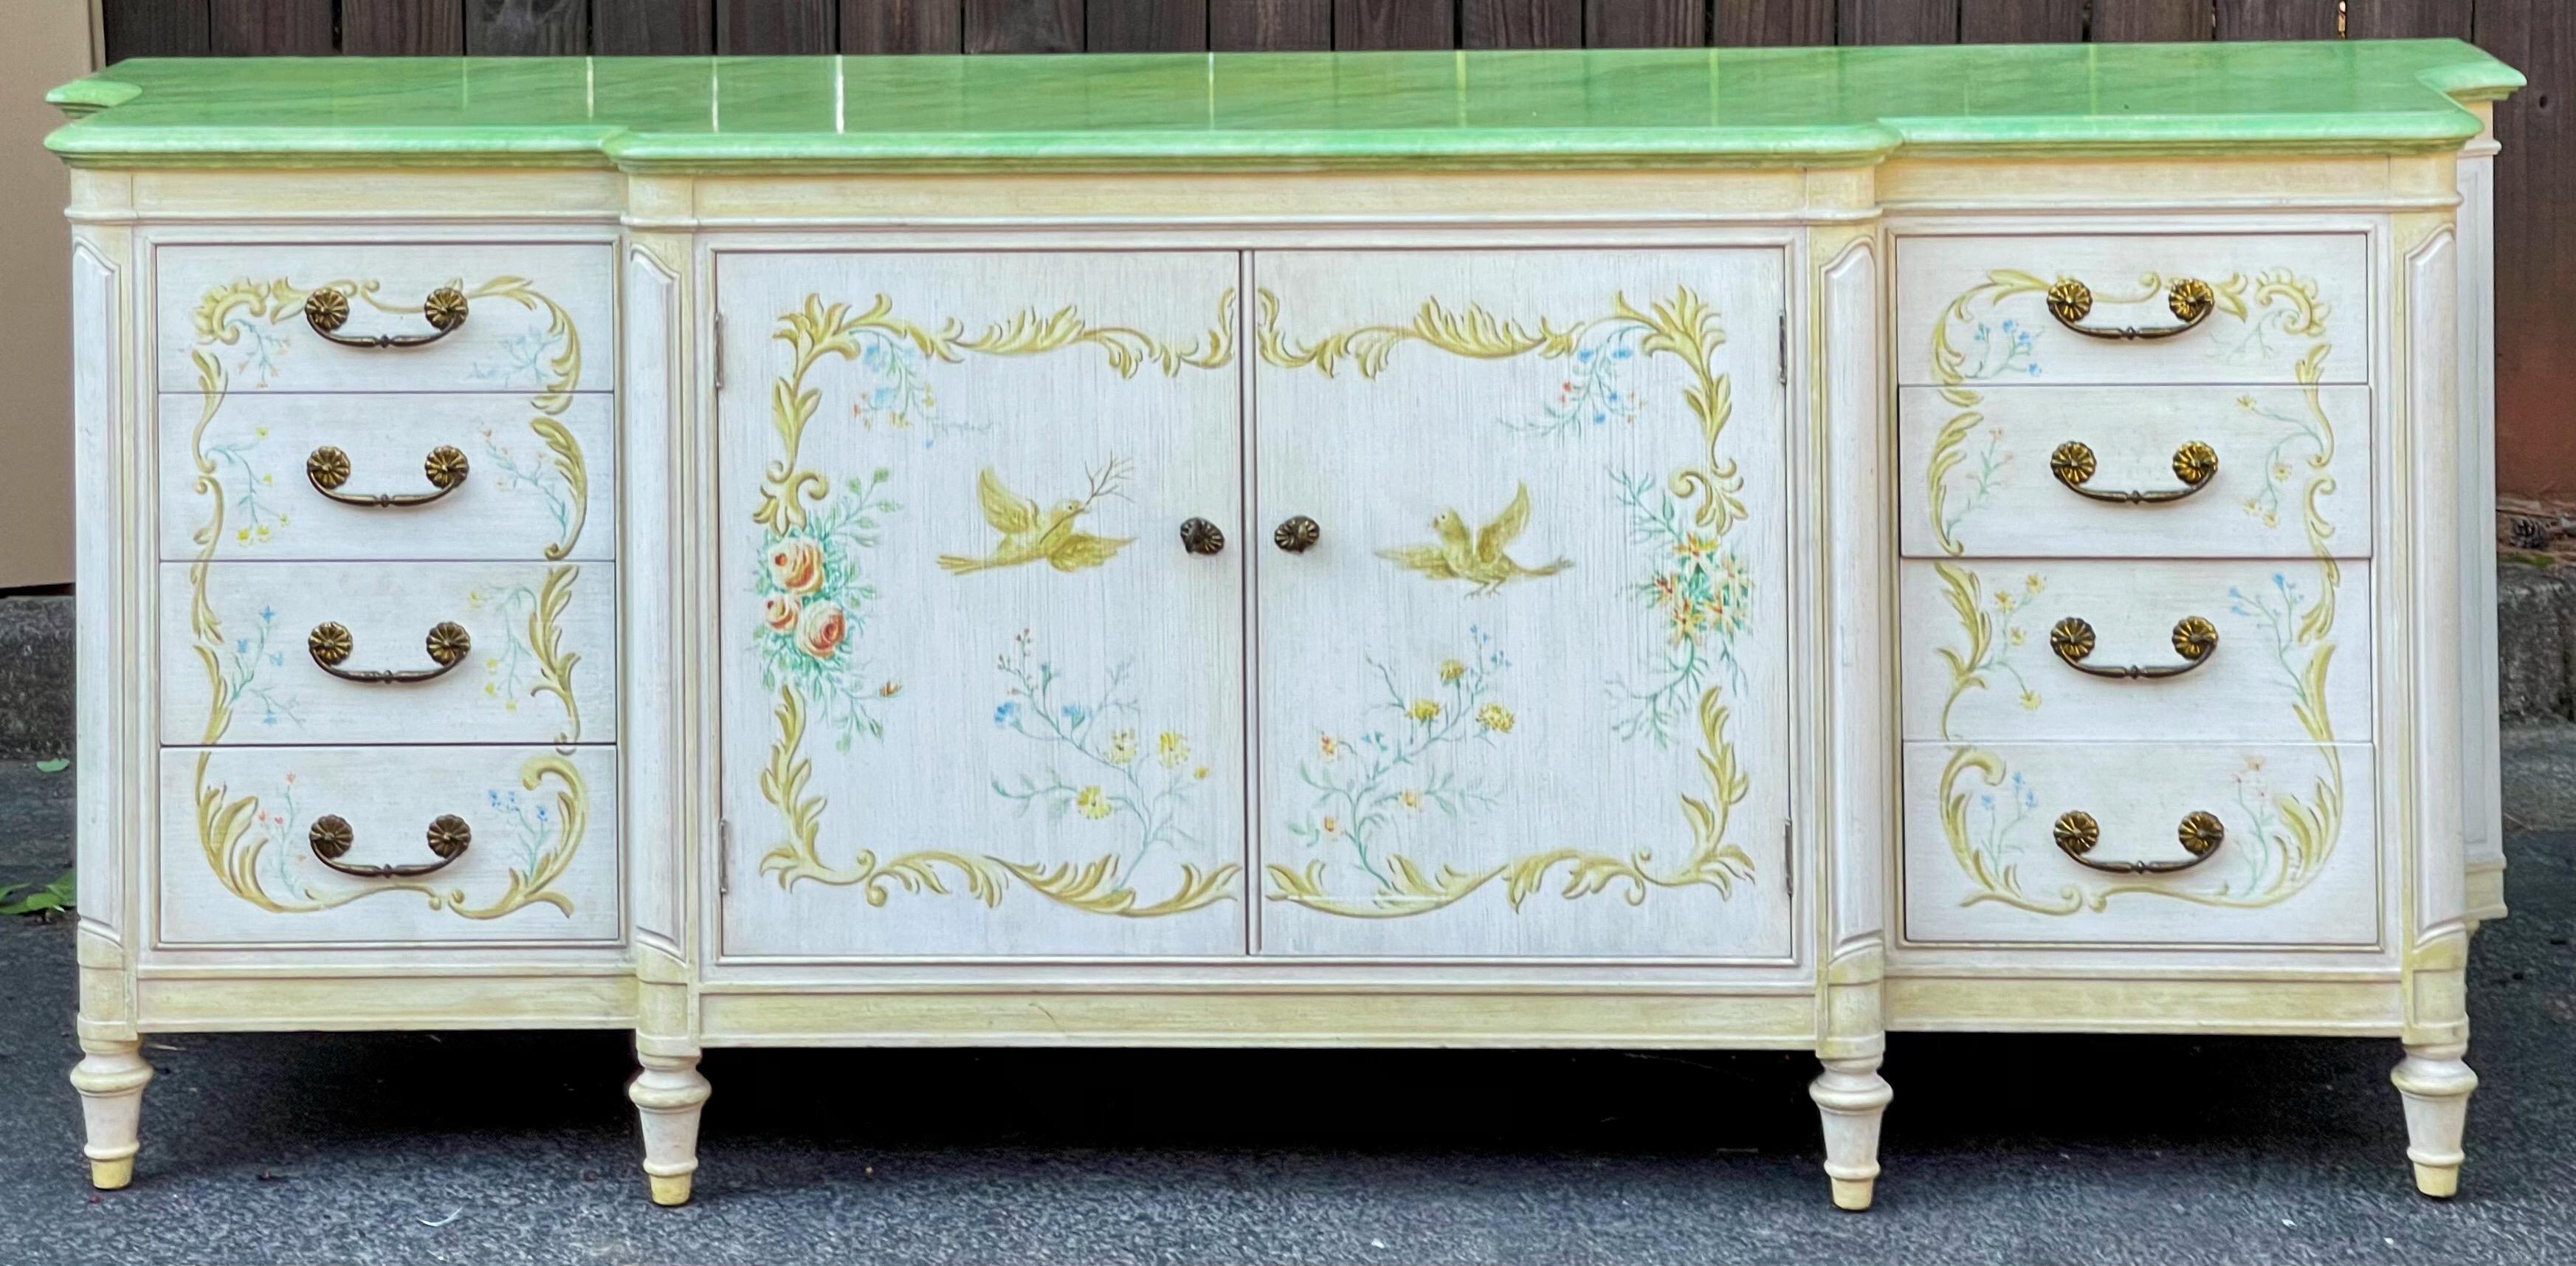 1960s Venetian Style Italian Sideboard / Credenza Or Cabinet W/ Faux Marble Top For Sale 3